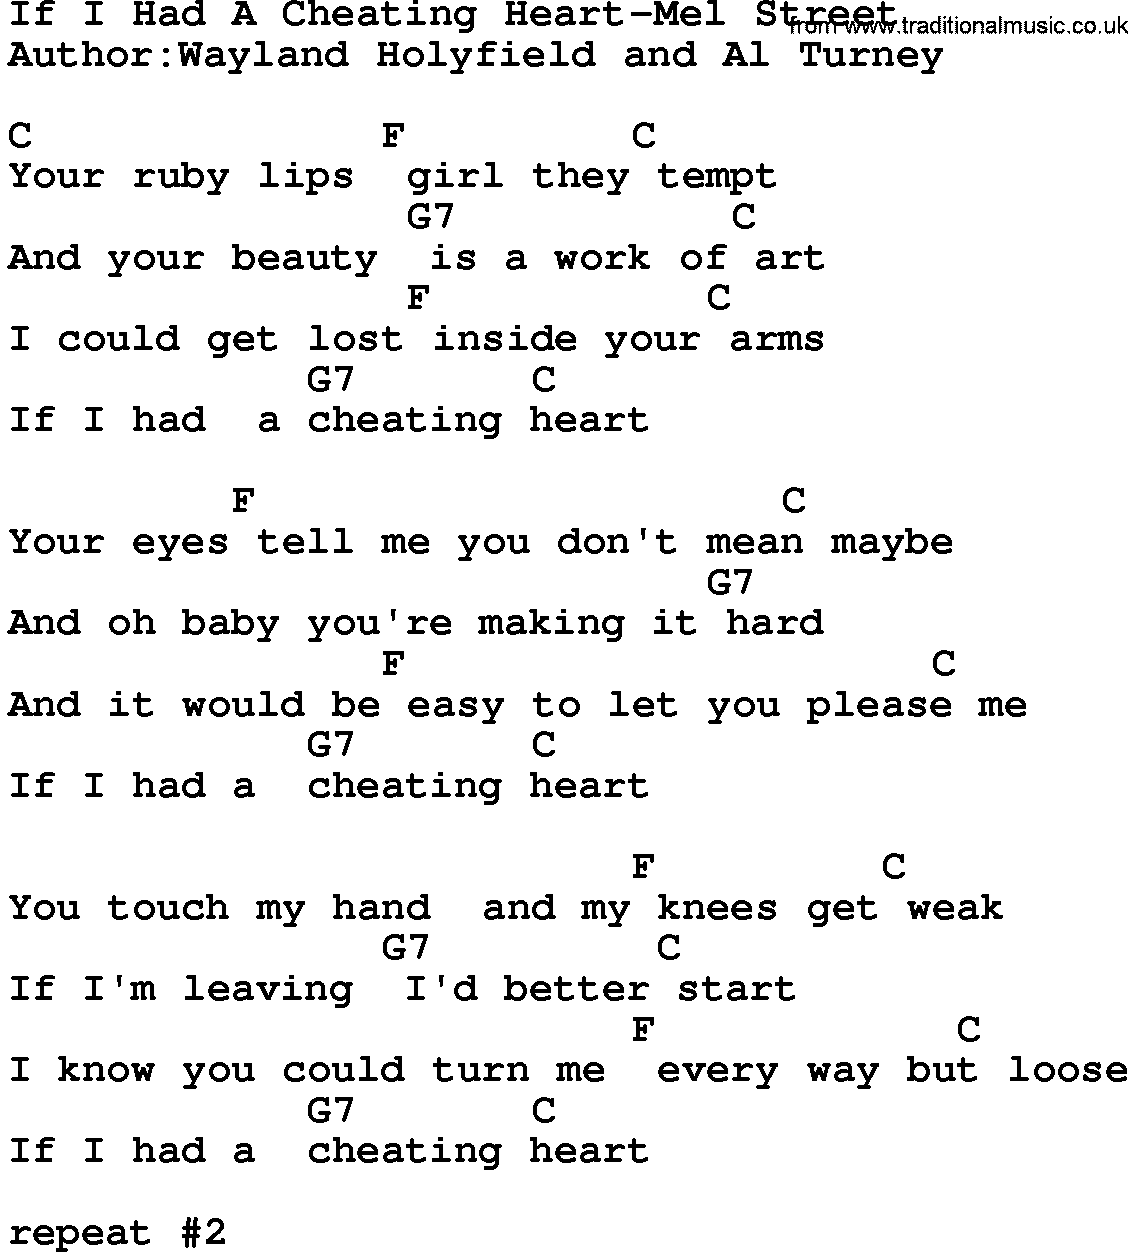 Country music song: If I Had A Cheating Heart-Mel Street lyrics and chords